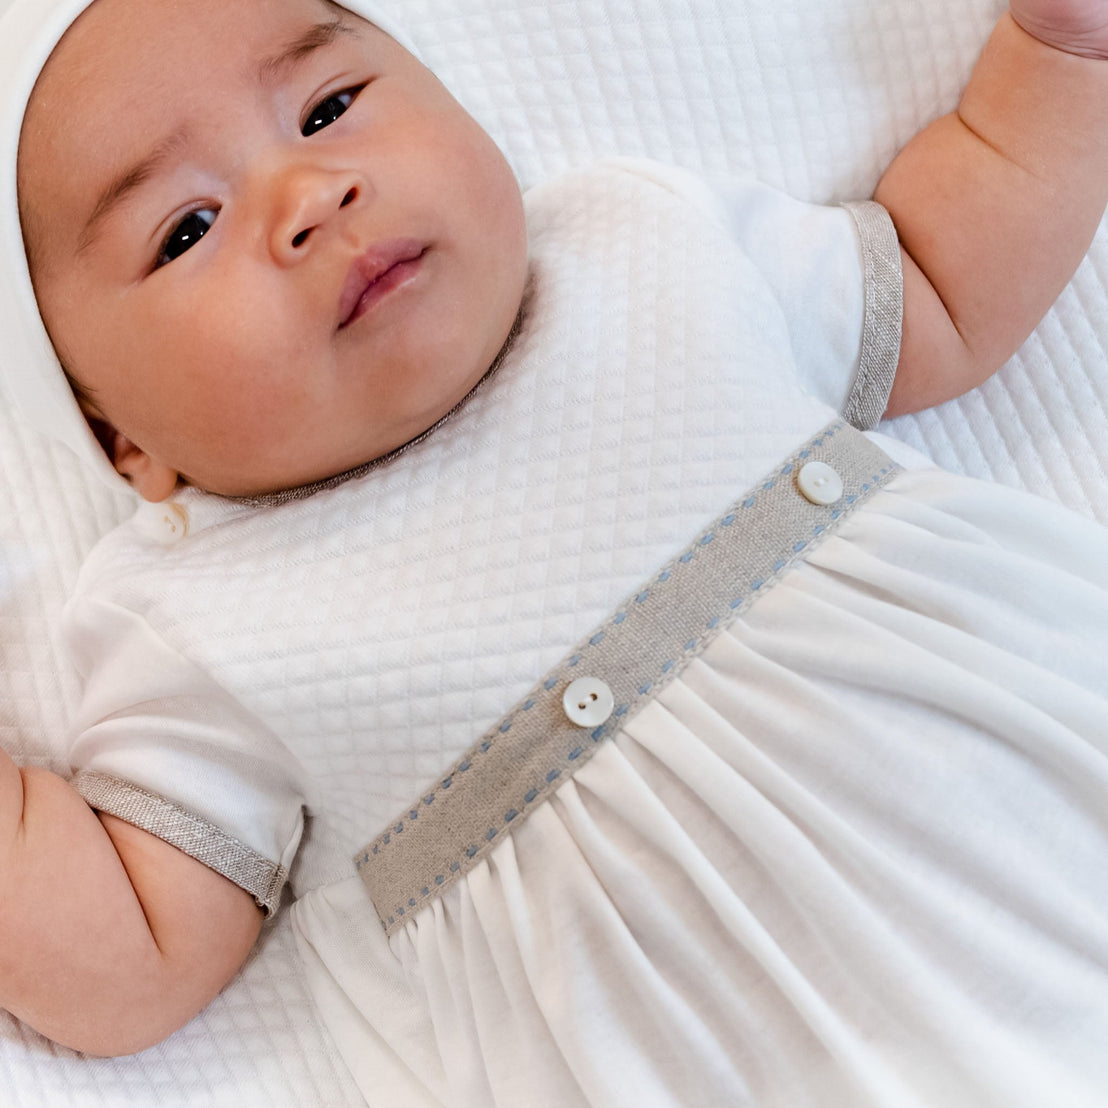 A close-up of a baby lying on a white blanket, wearing the Austin Layette & Hat, looking upwards with a calm expression.